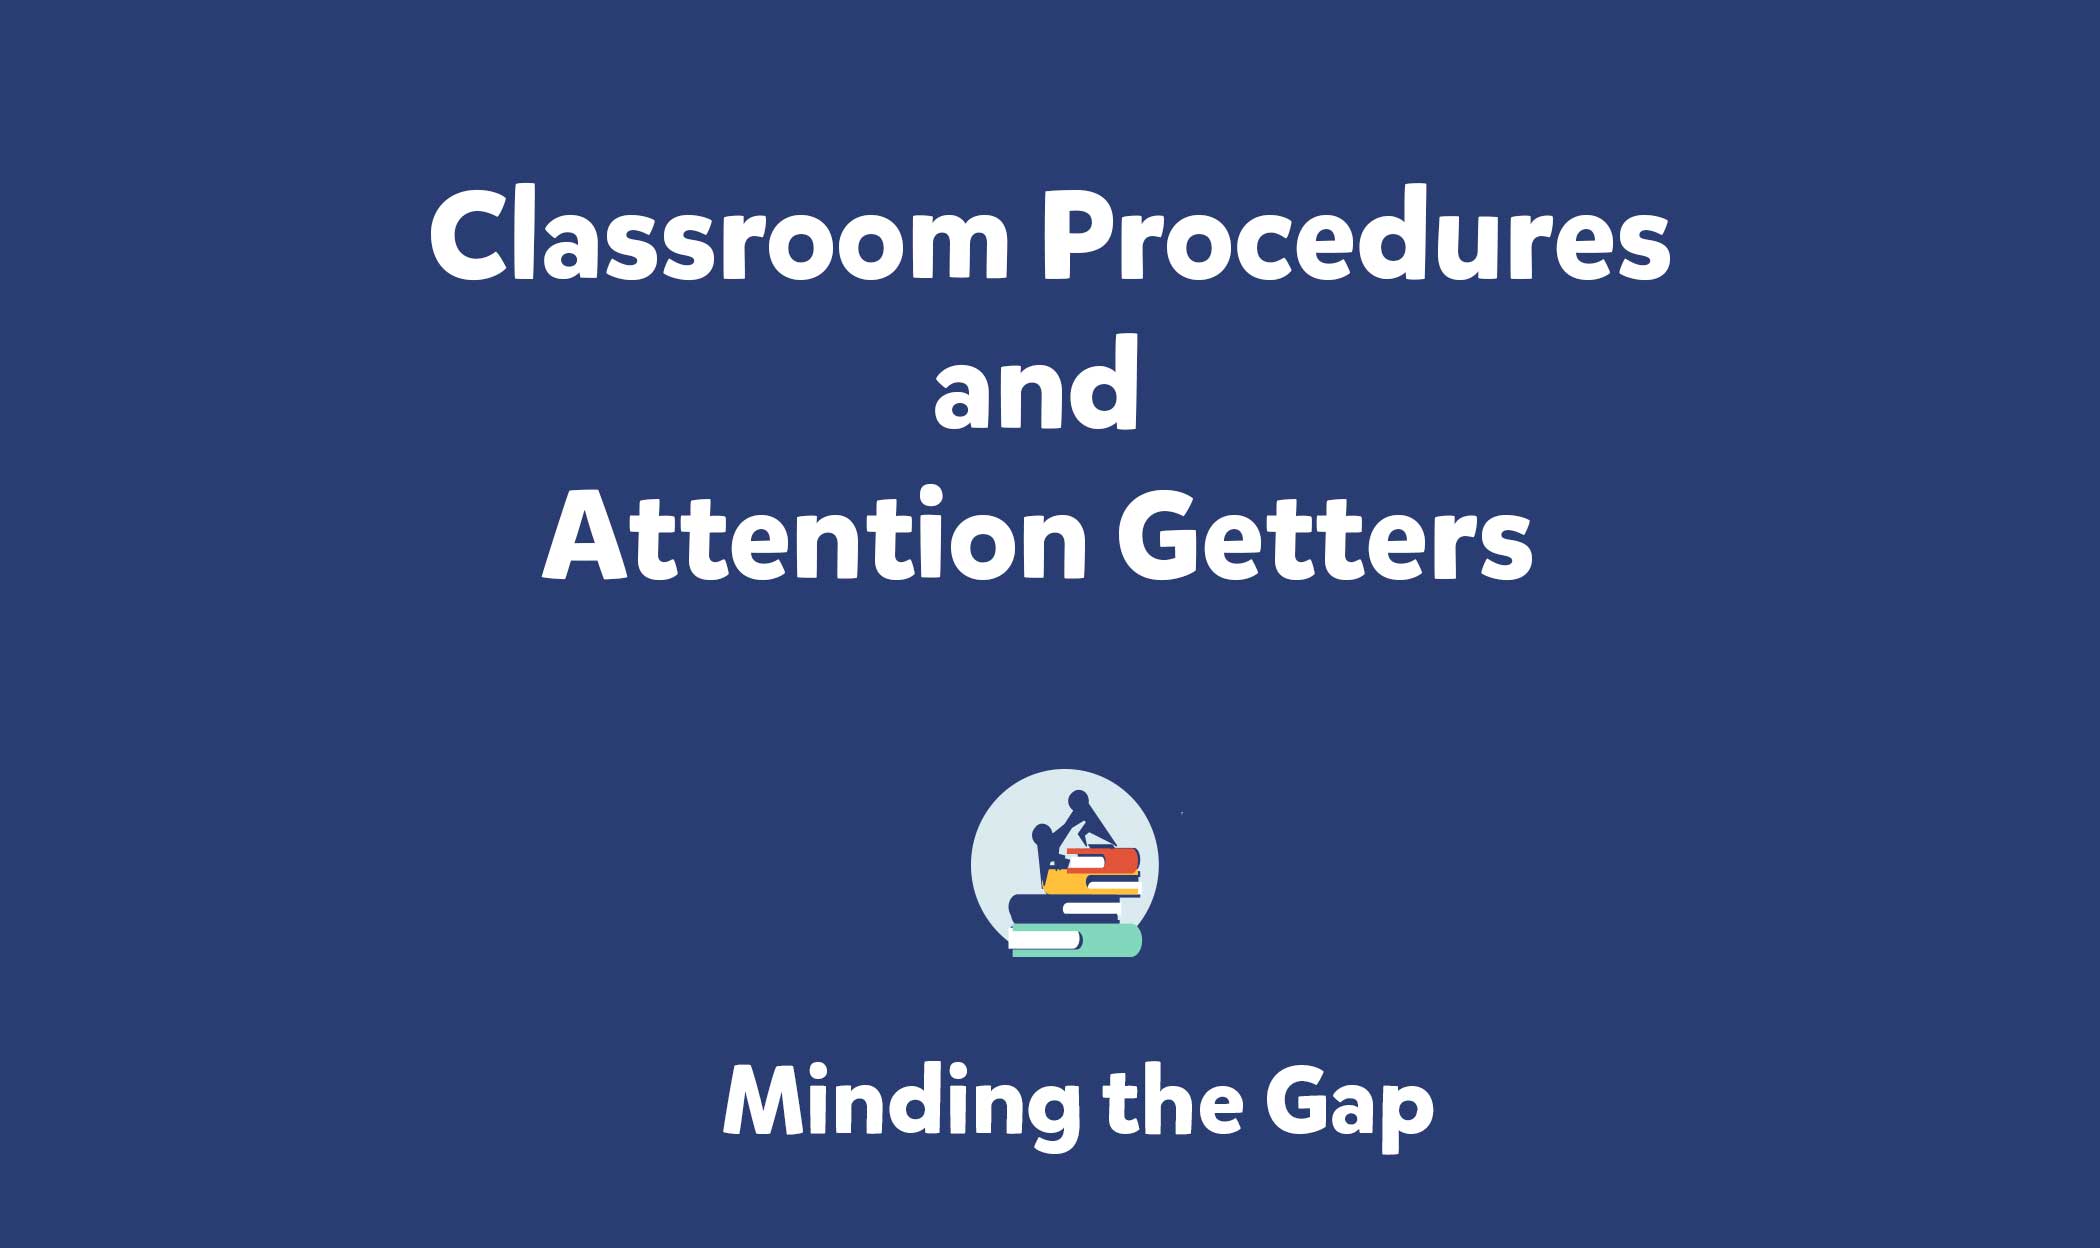 Classroom Procedures and Attention Getters